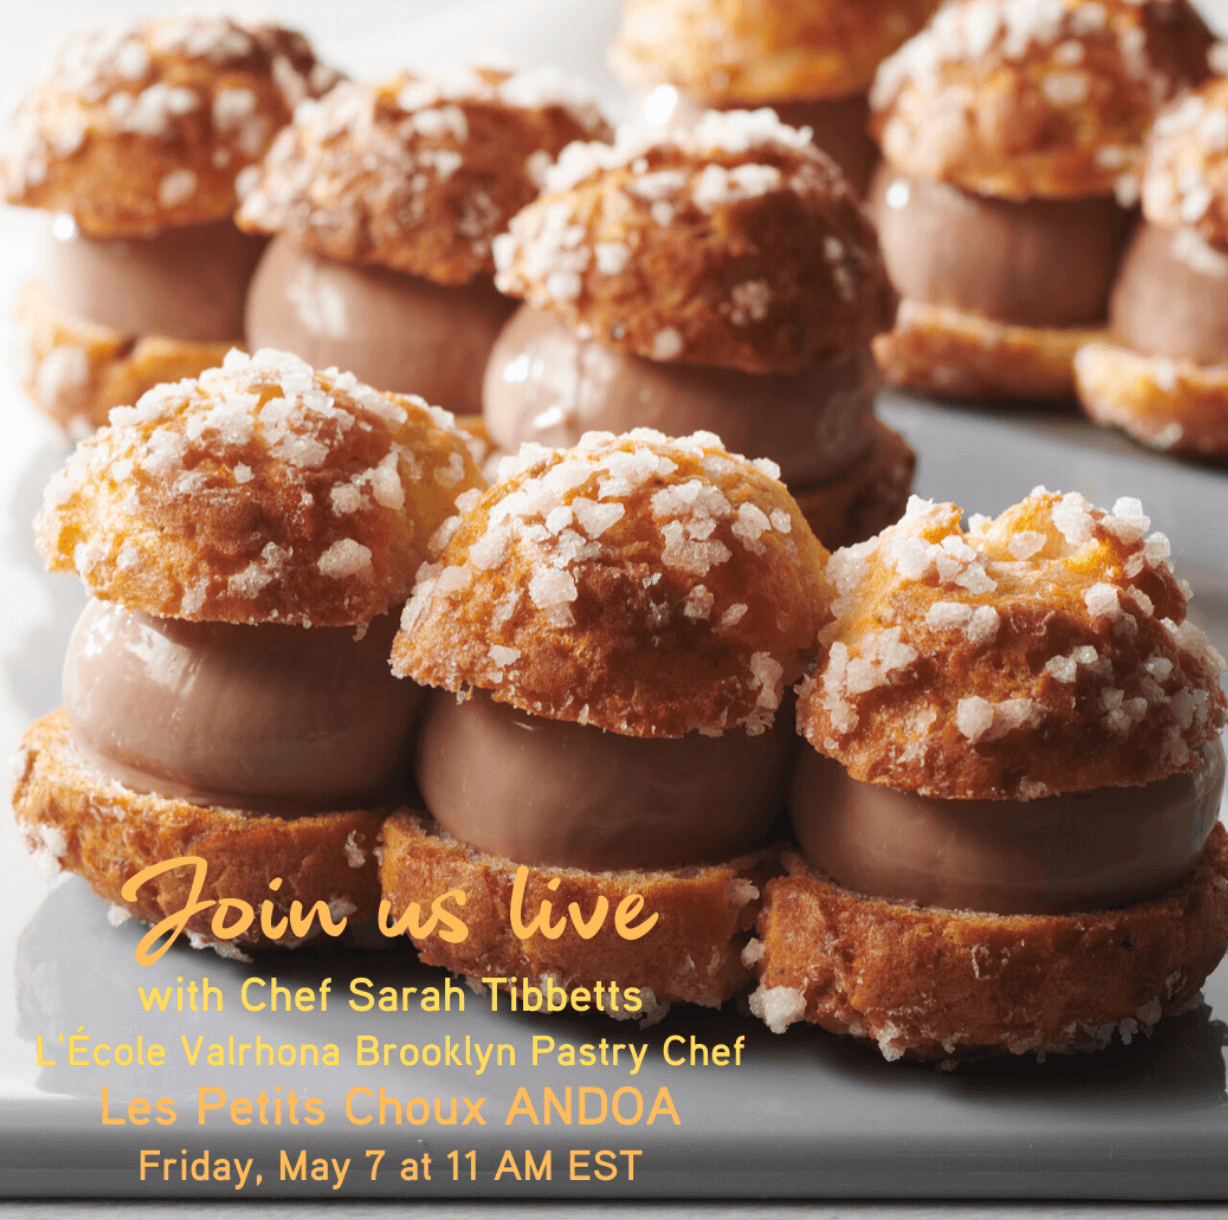 Announcing IG Live with Sarah: Les Petits Choux ANDOA